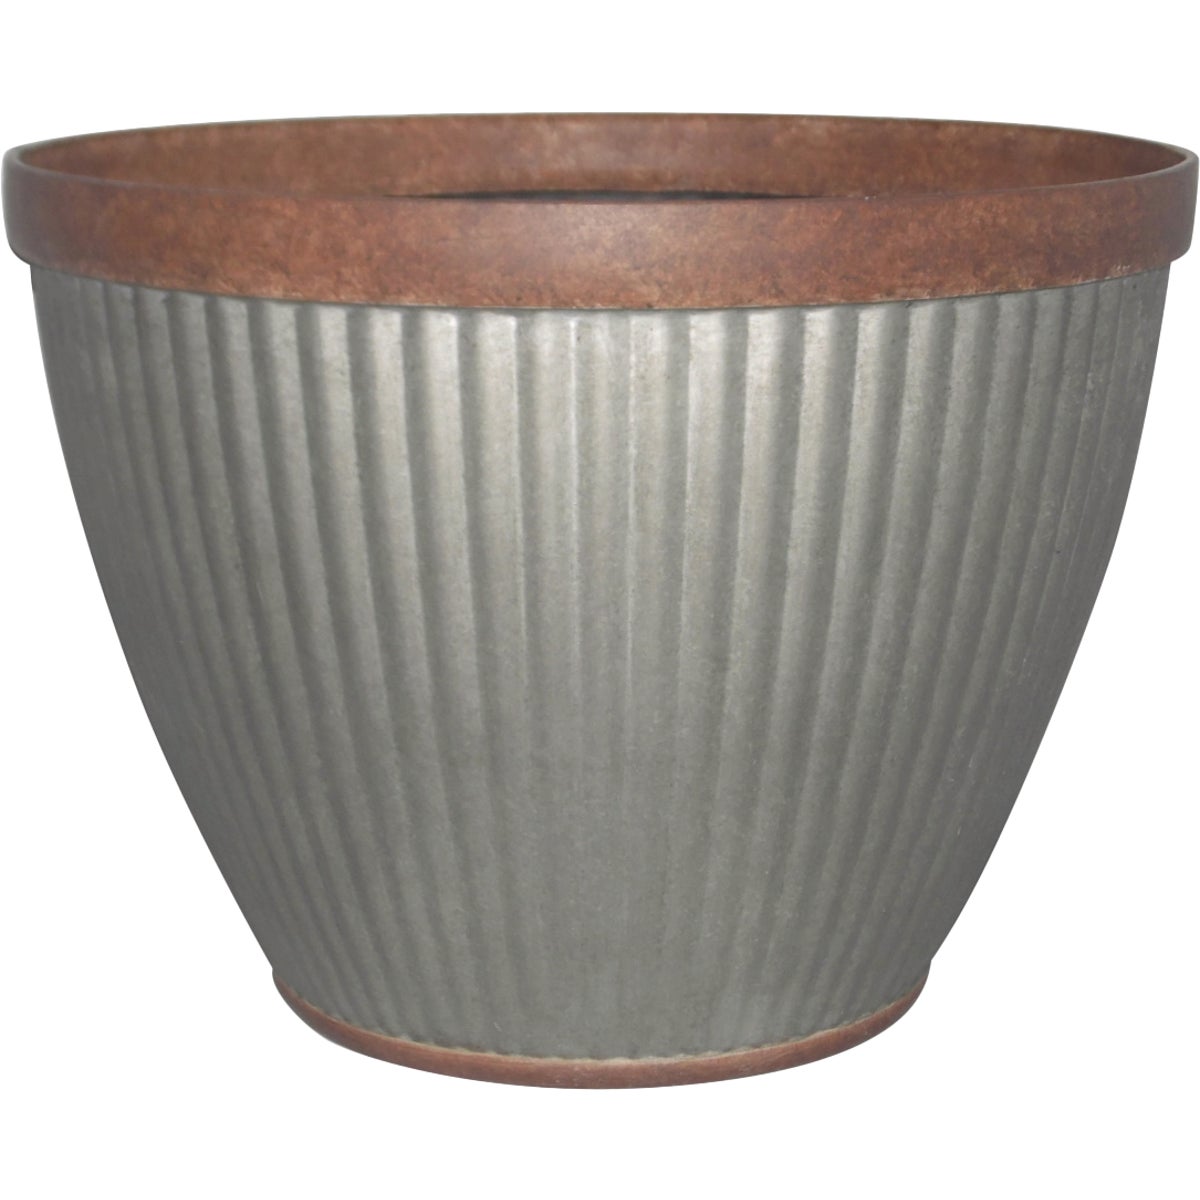 Southern Patio Westlake 20.5 In. Resin Rustic Galvanized Round Pleated Planter